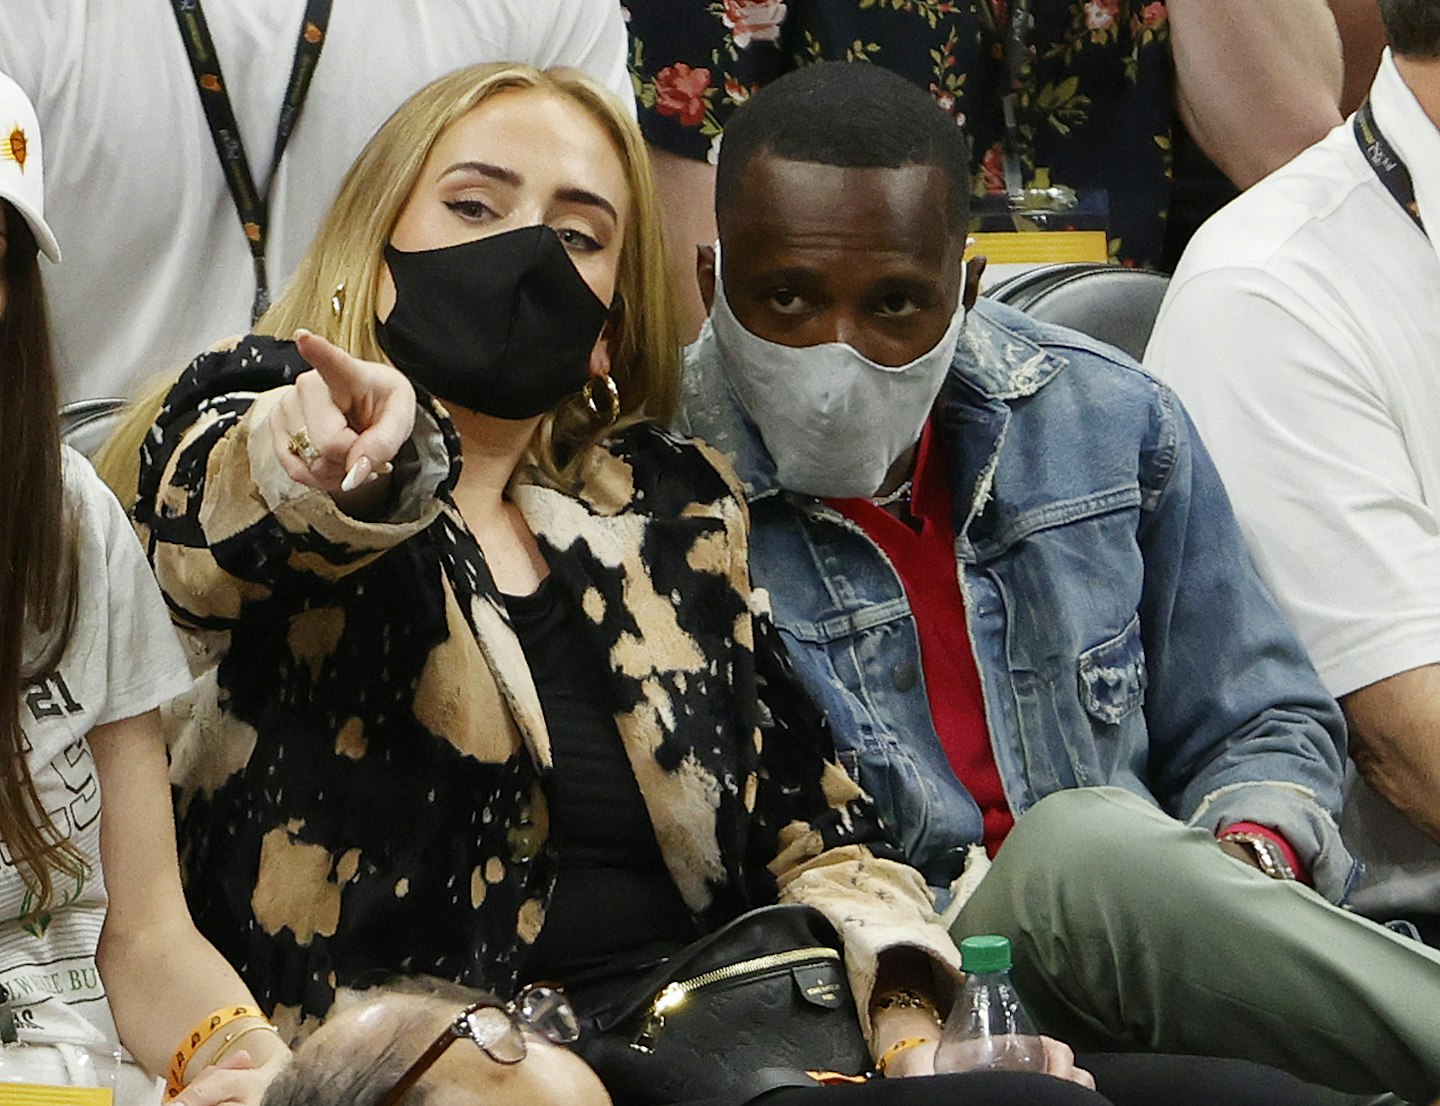 Adele dating Rich Paul